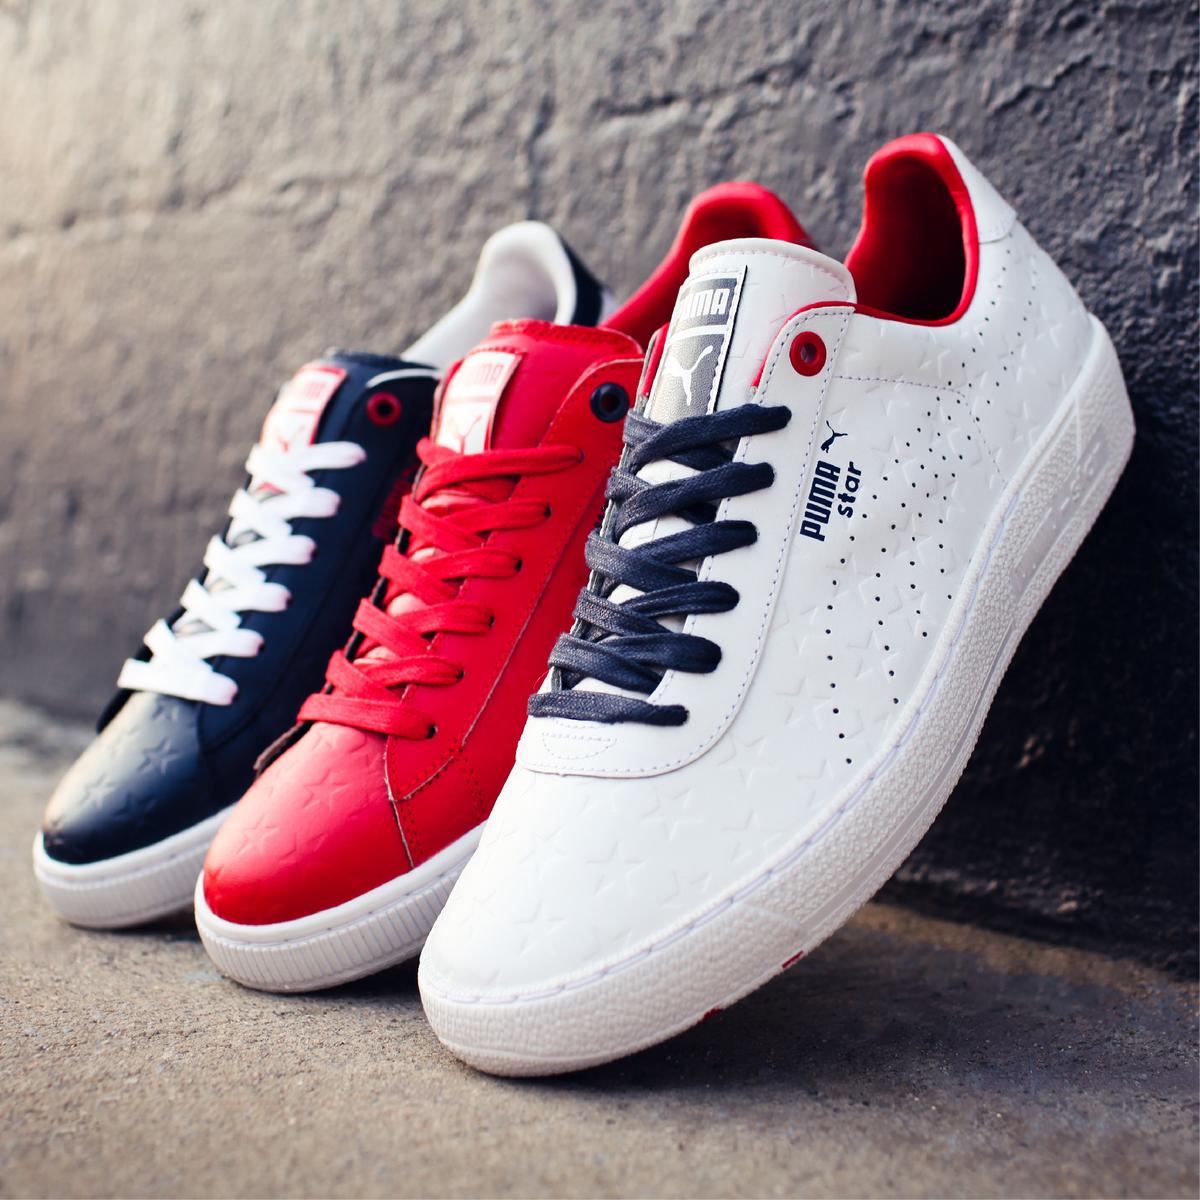 puma shoes new collection 2015